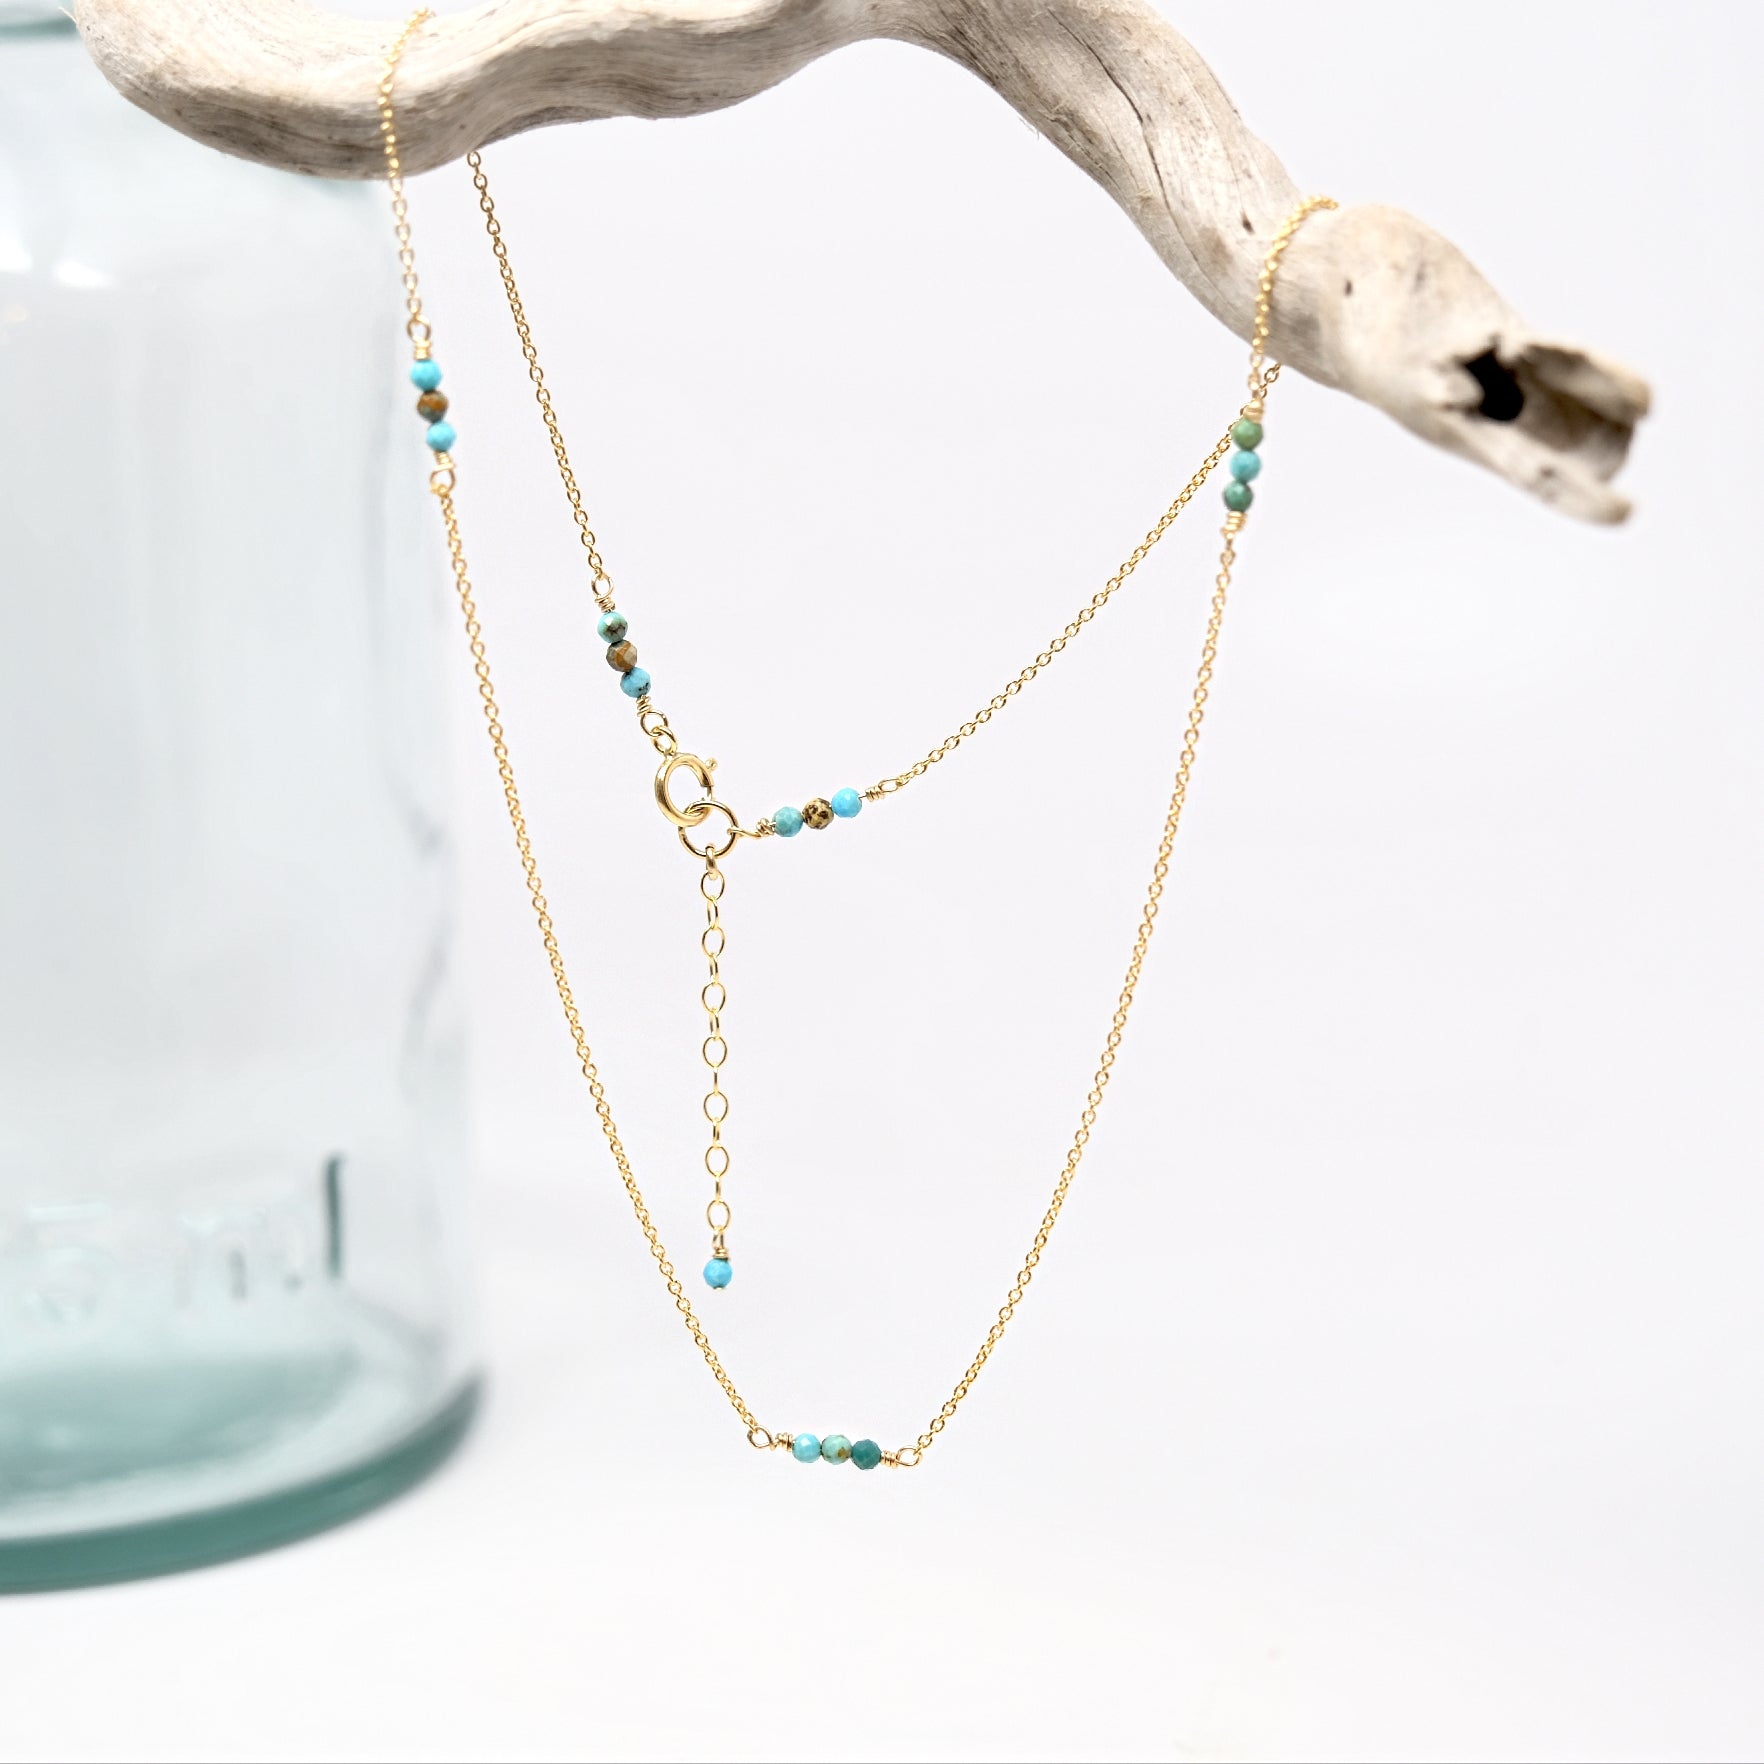 Travel Treasures Turquoise Necklace